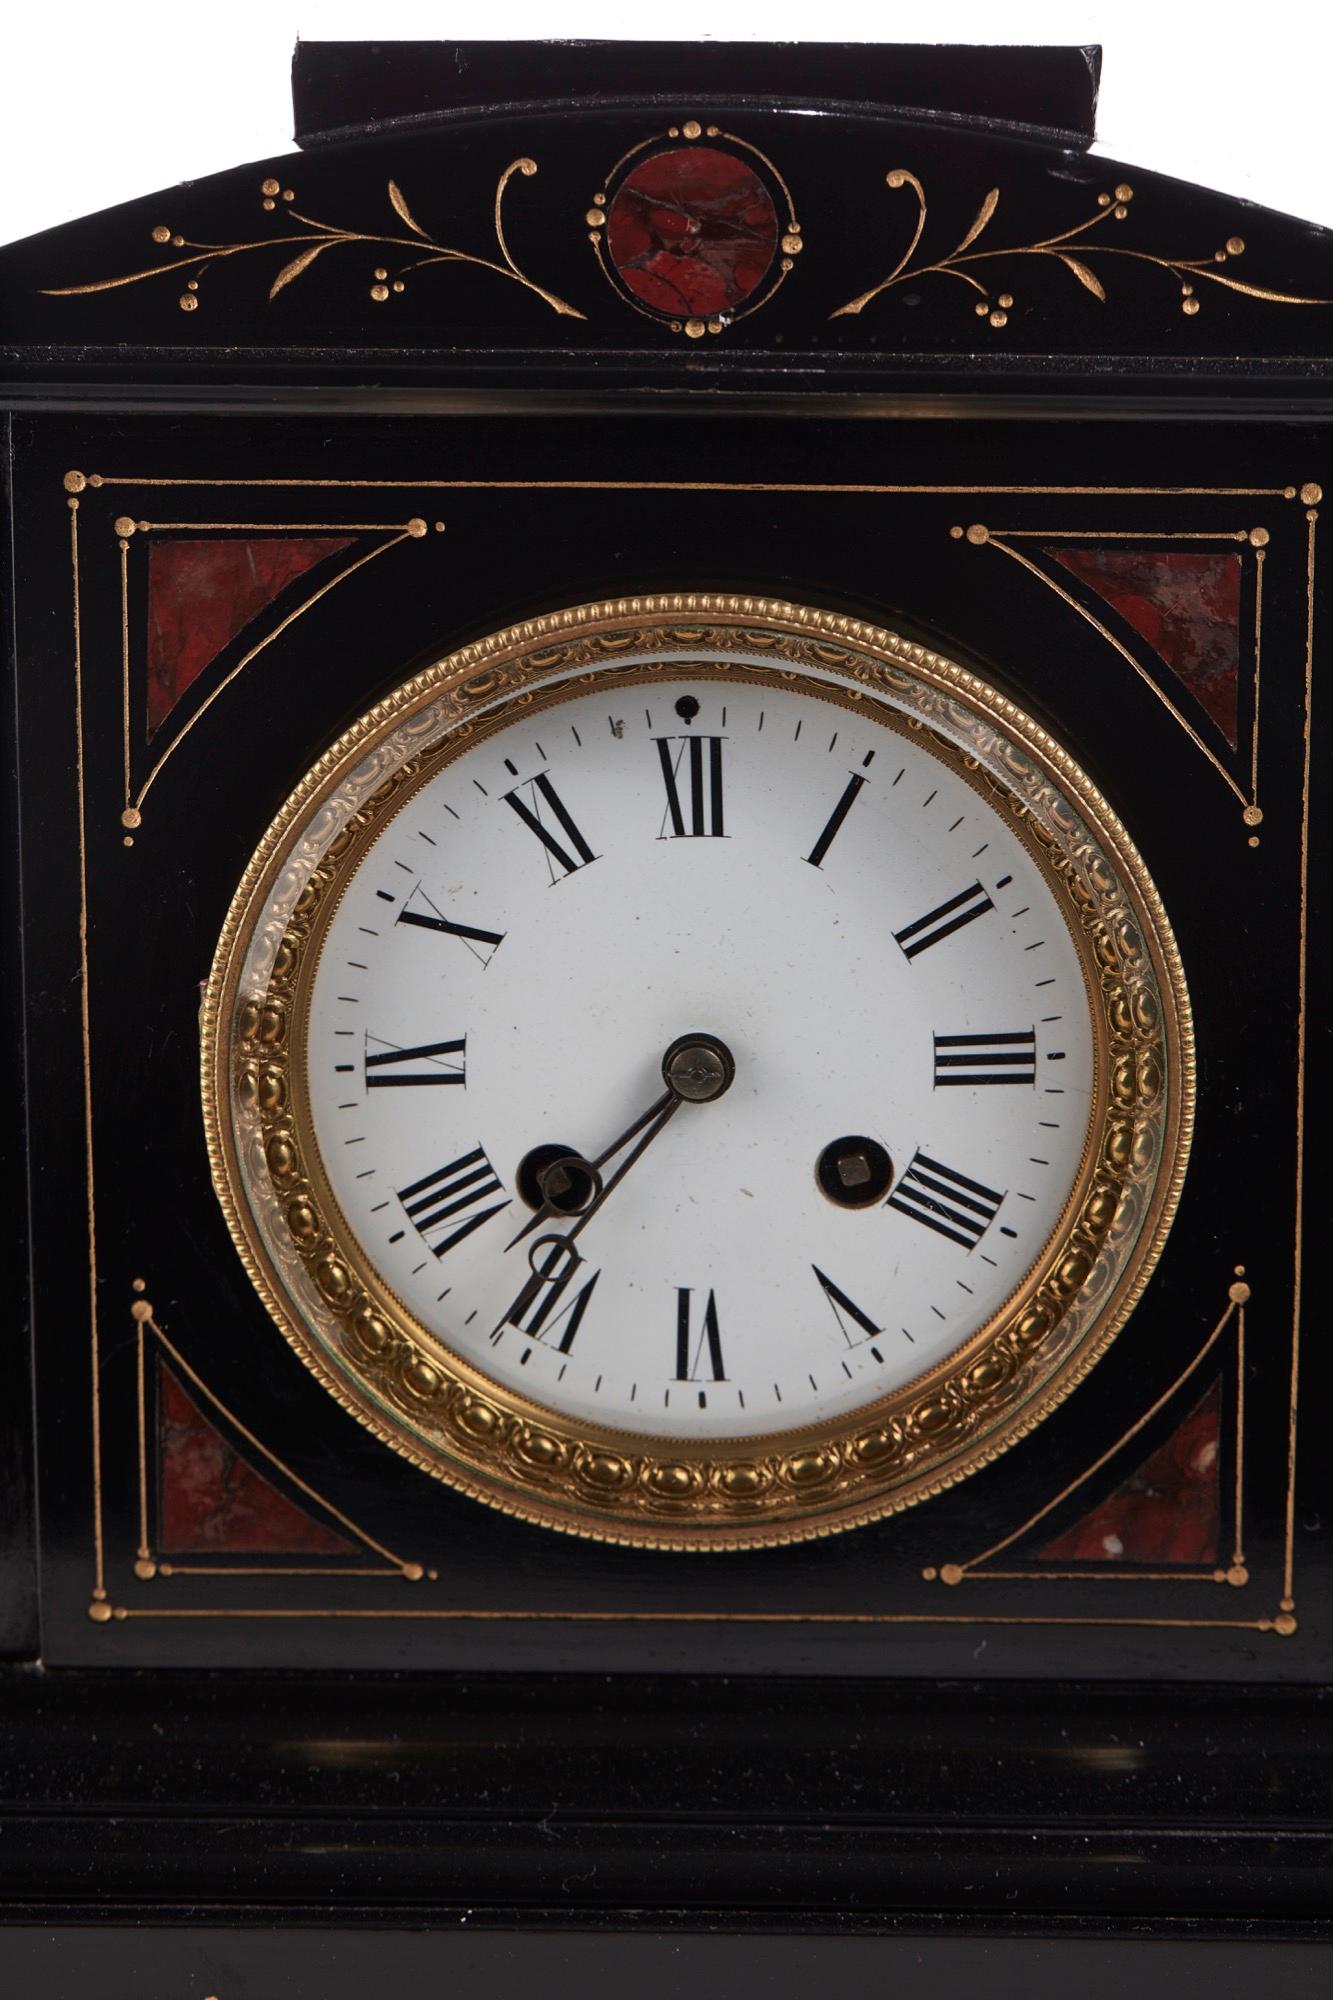 This is a 19th century Victorian antique 8 day marble mantel clock in a lovely shaped black, red and gold case with enameled dial, brass bezel and 8 day movement striking on a bell. It has an original key.